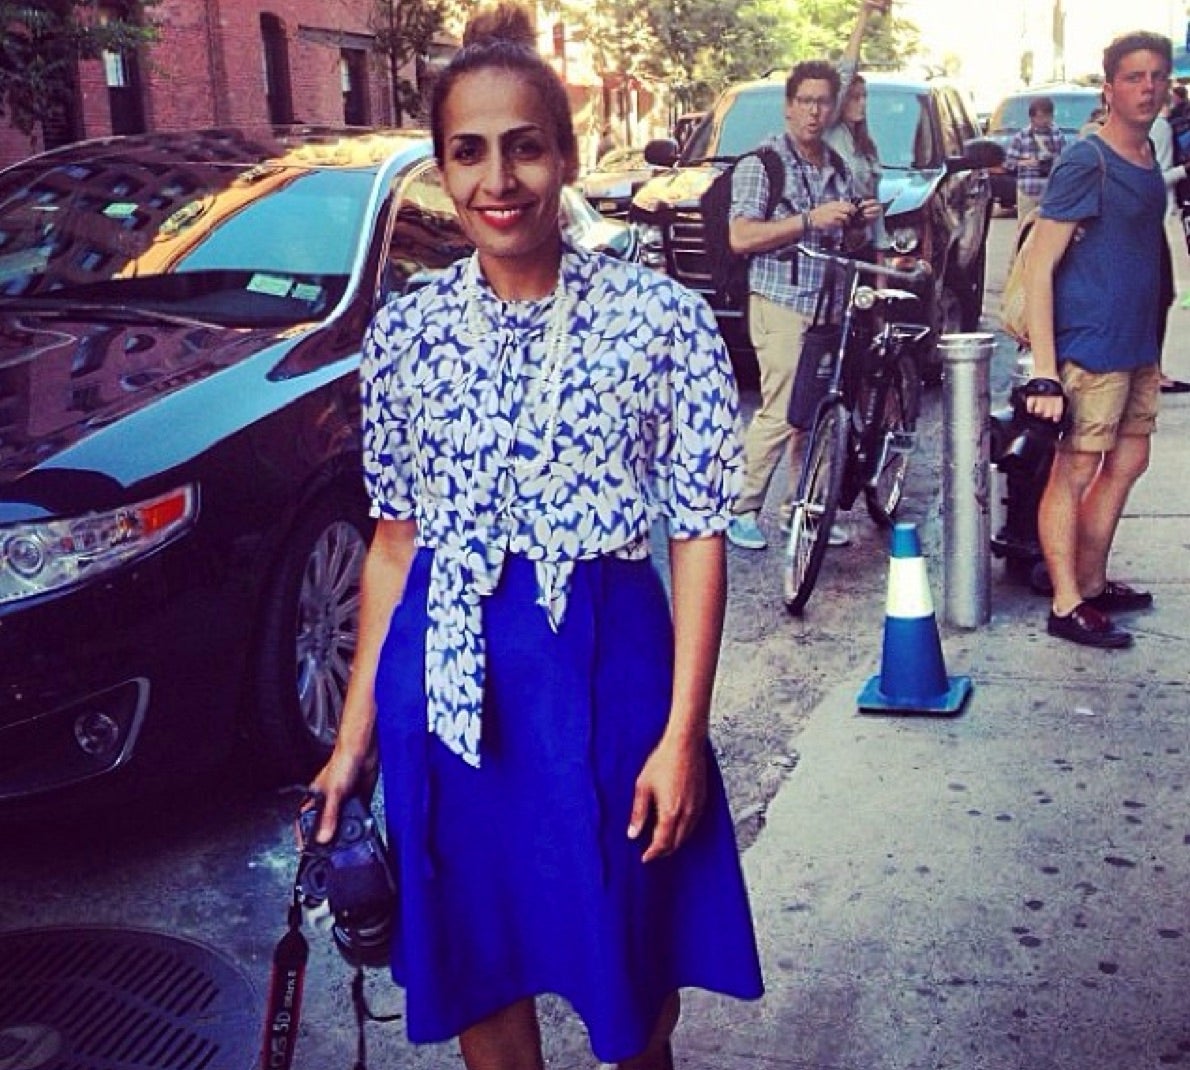 10 Photographers To Follow for Epic NYFW Street Style Moments